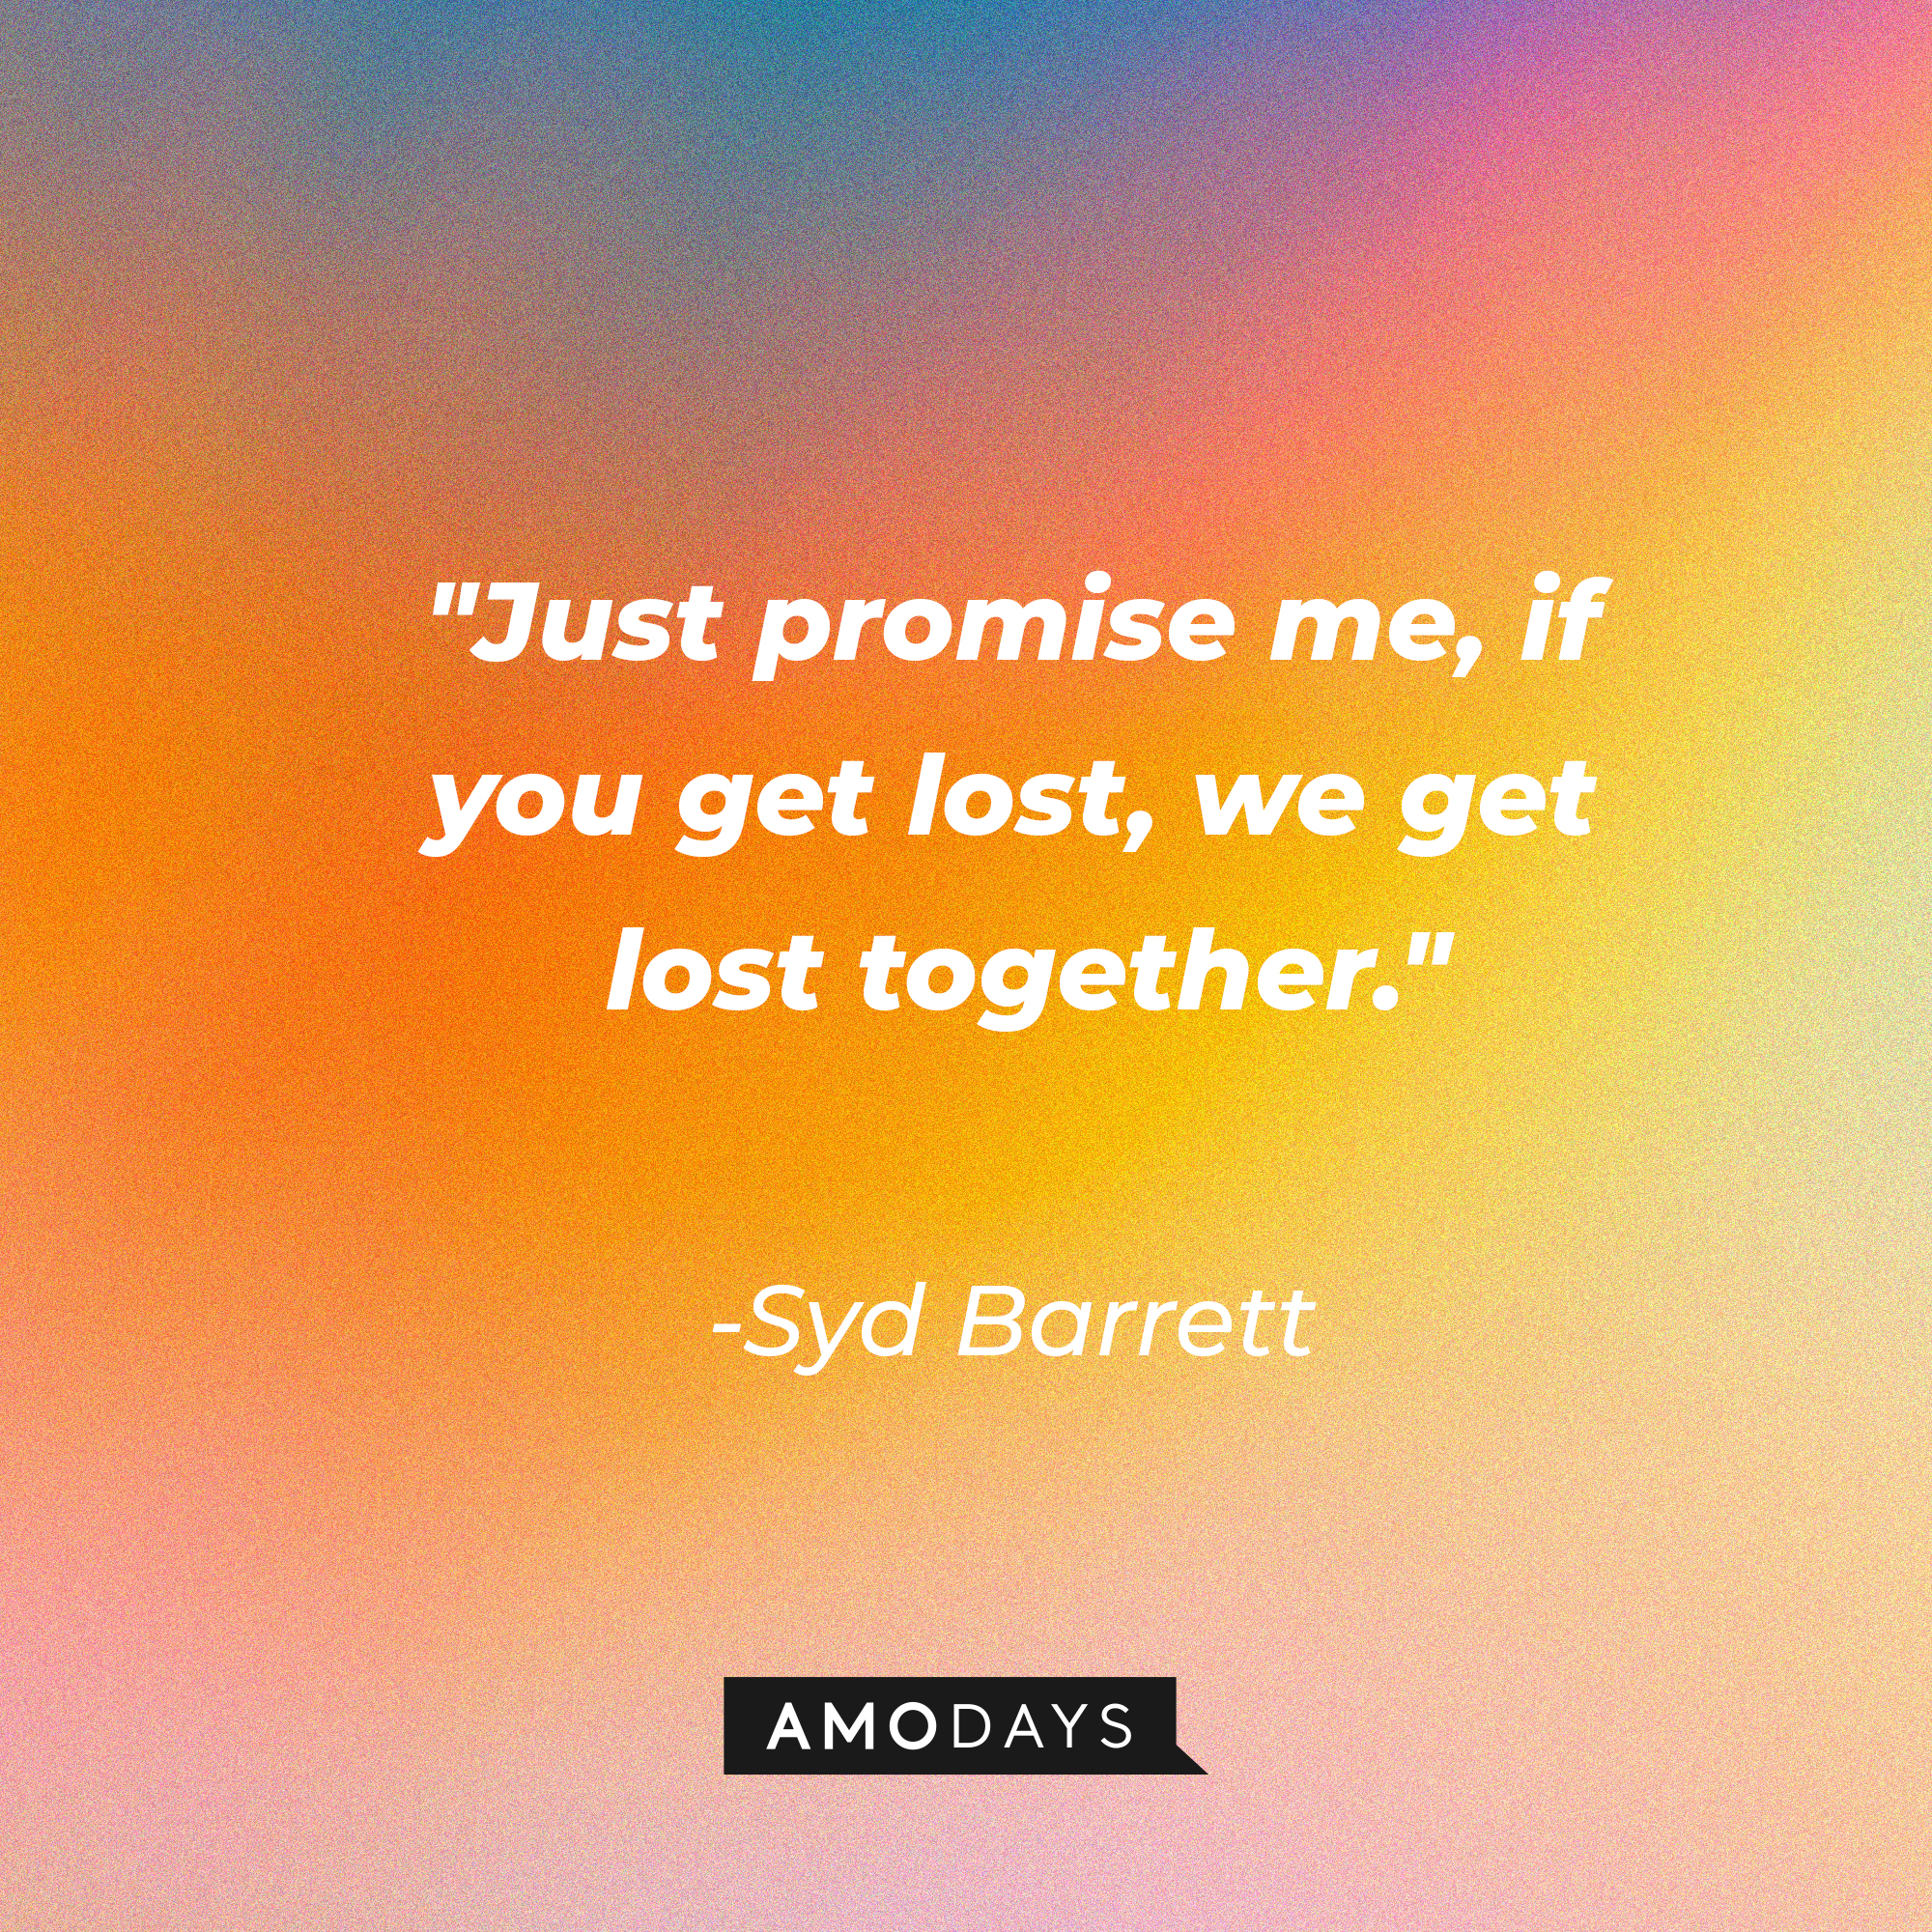 Syd Barrett's quote: "Just promise me, if you get lost, we get lost together." | Image: AmoDays